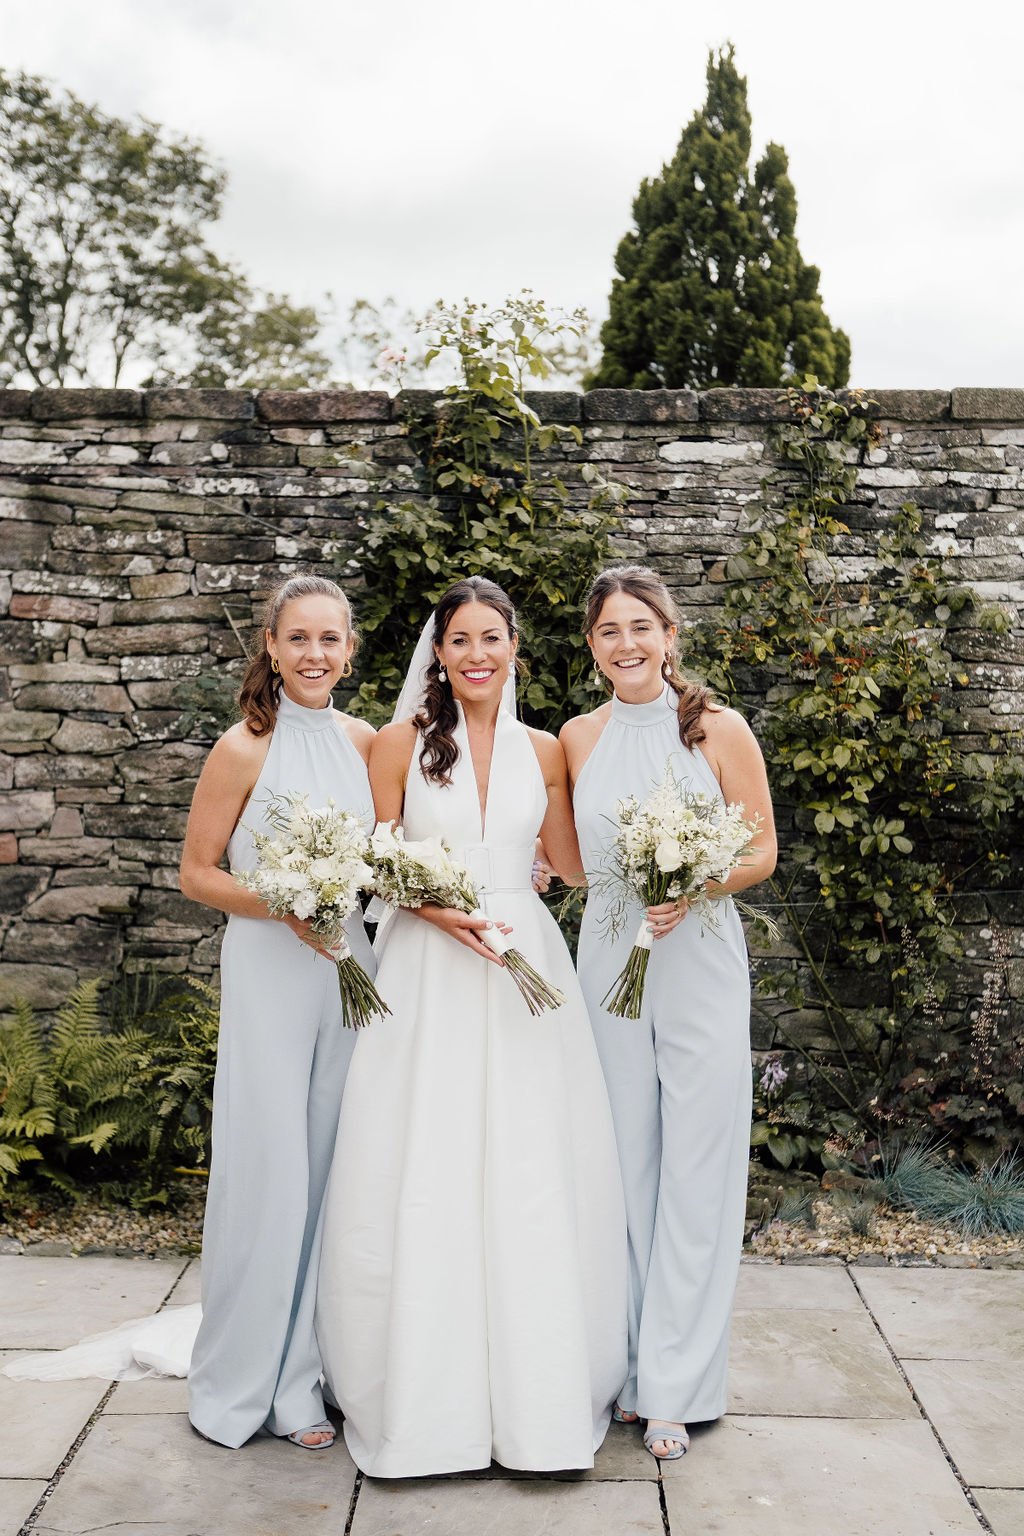 Scottish Bride standing with bridesmaid either side holding white bouquets